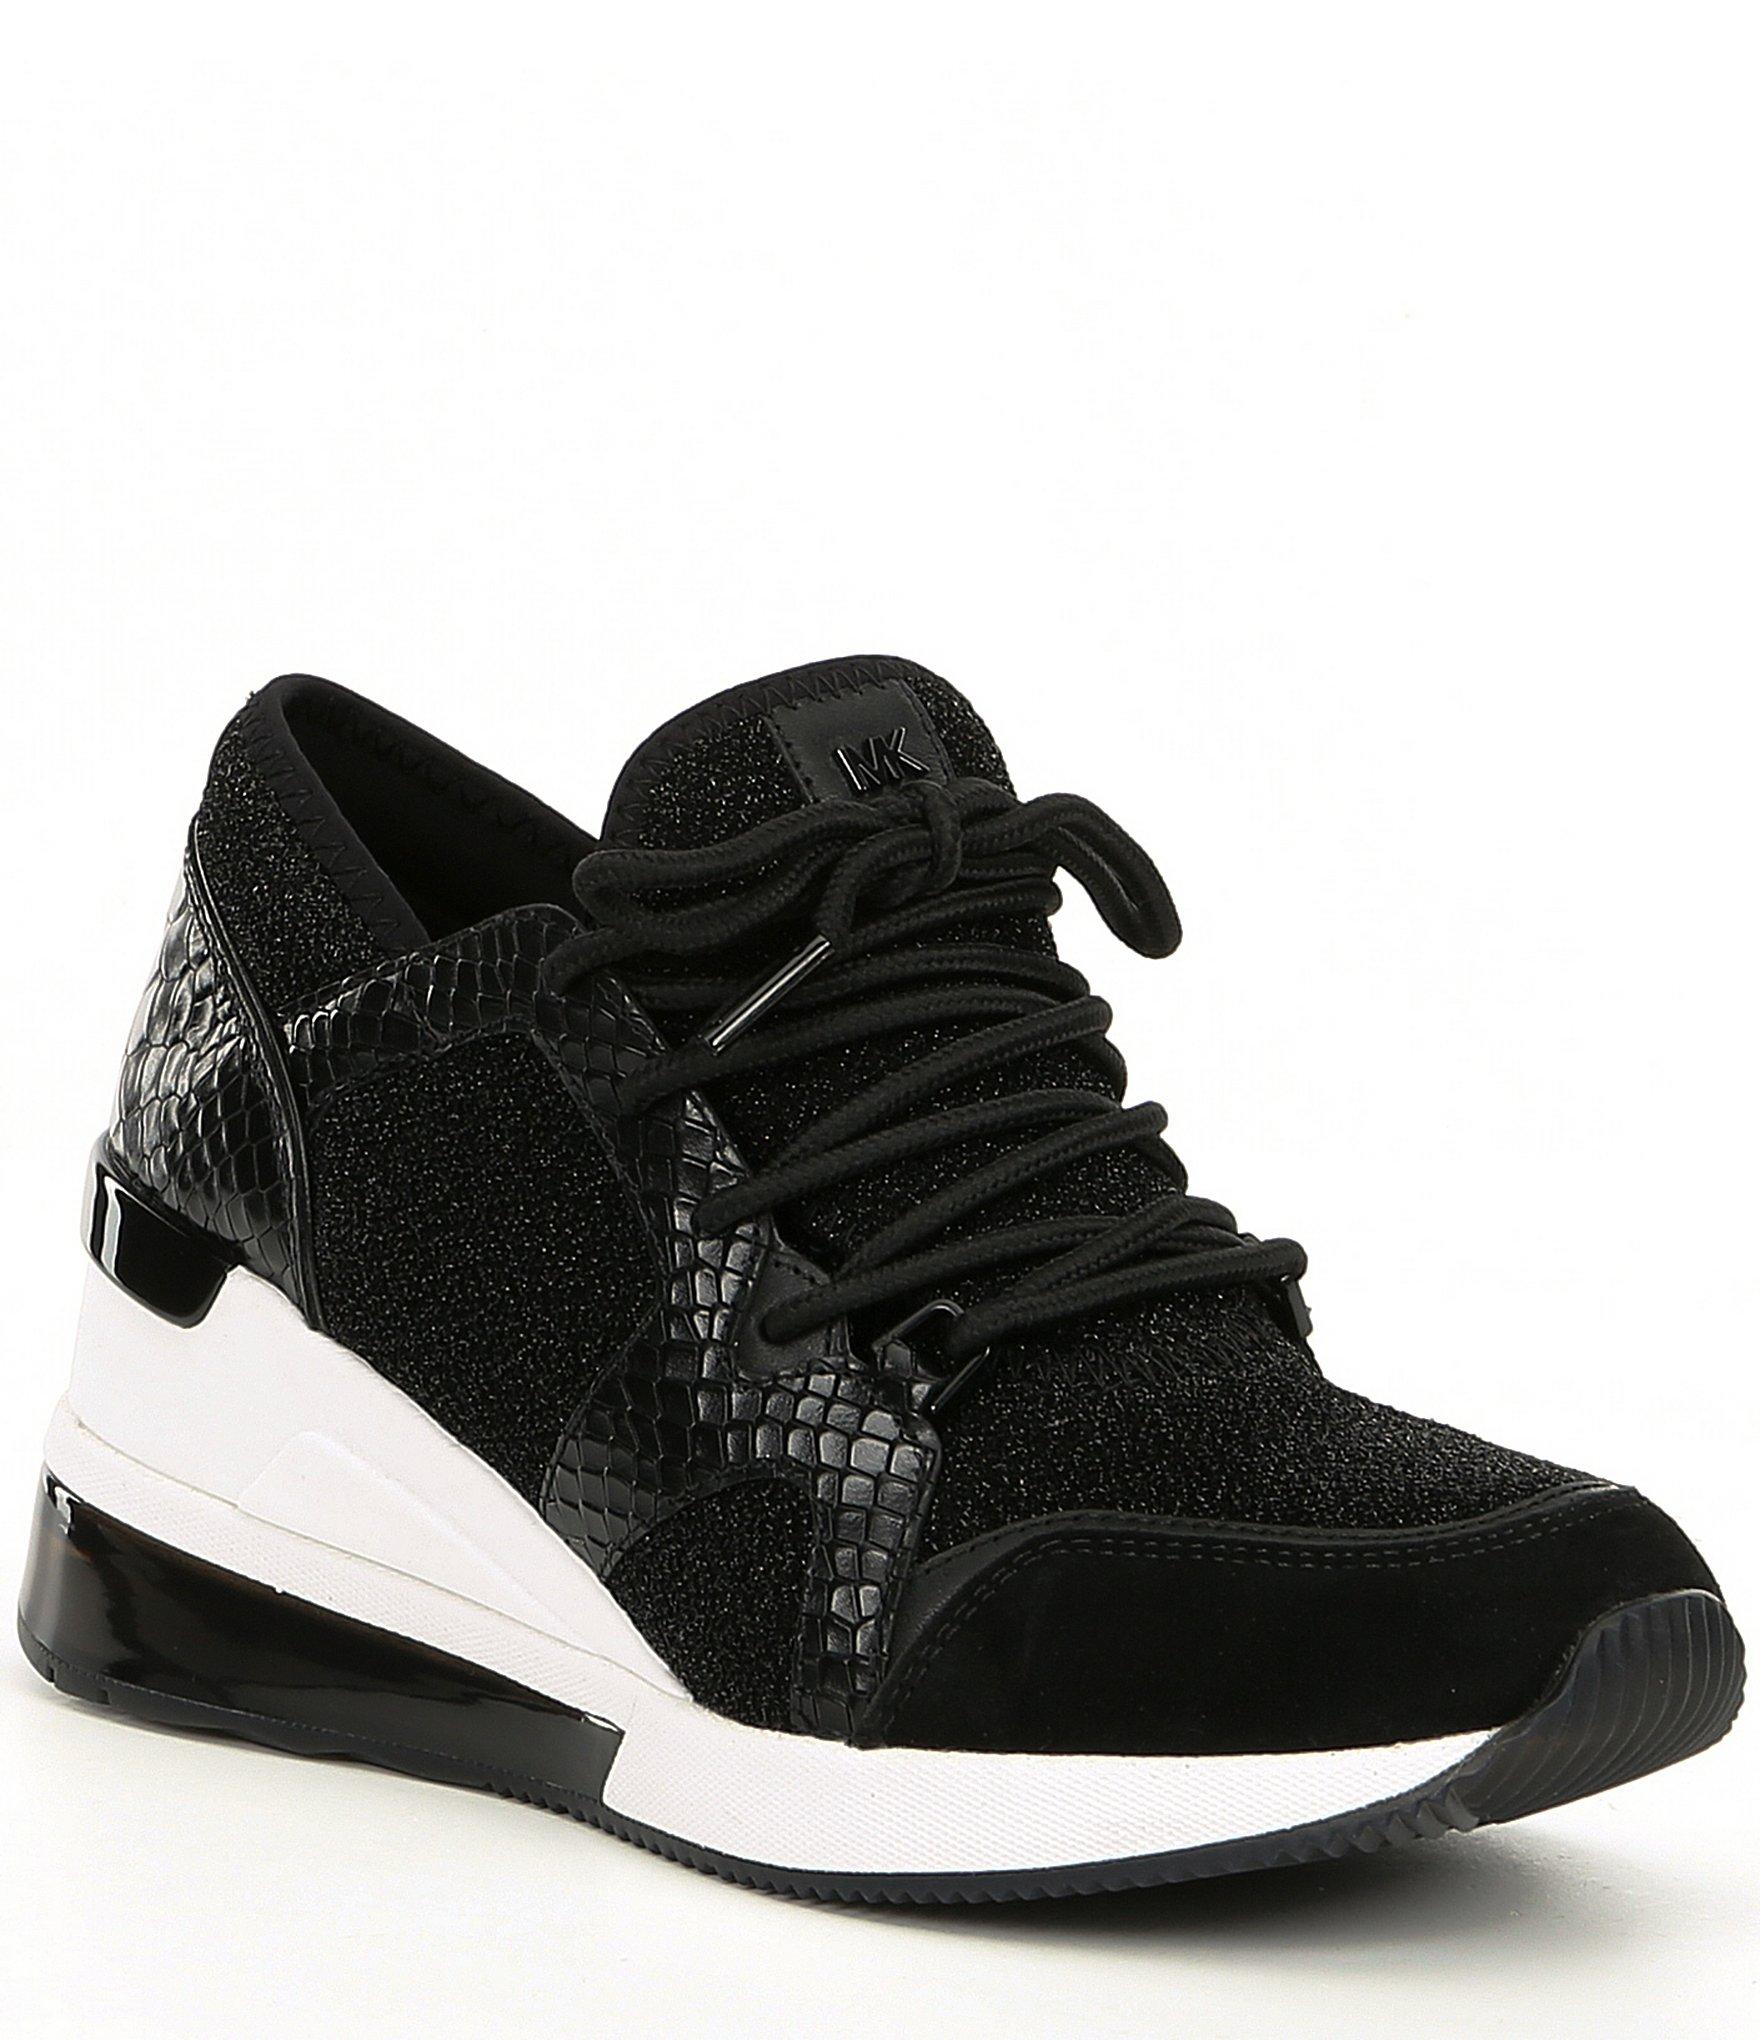 MICHAEL Michael Kors Liv Trainer Extreme Sneakers in Black - Lyst